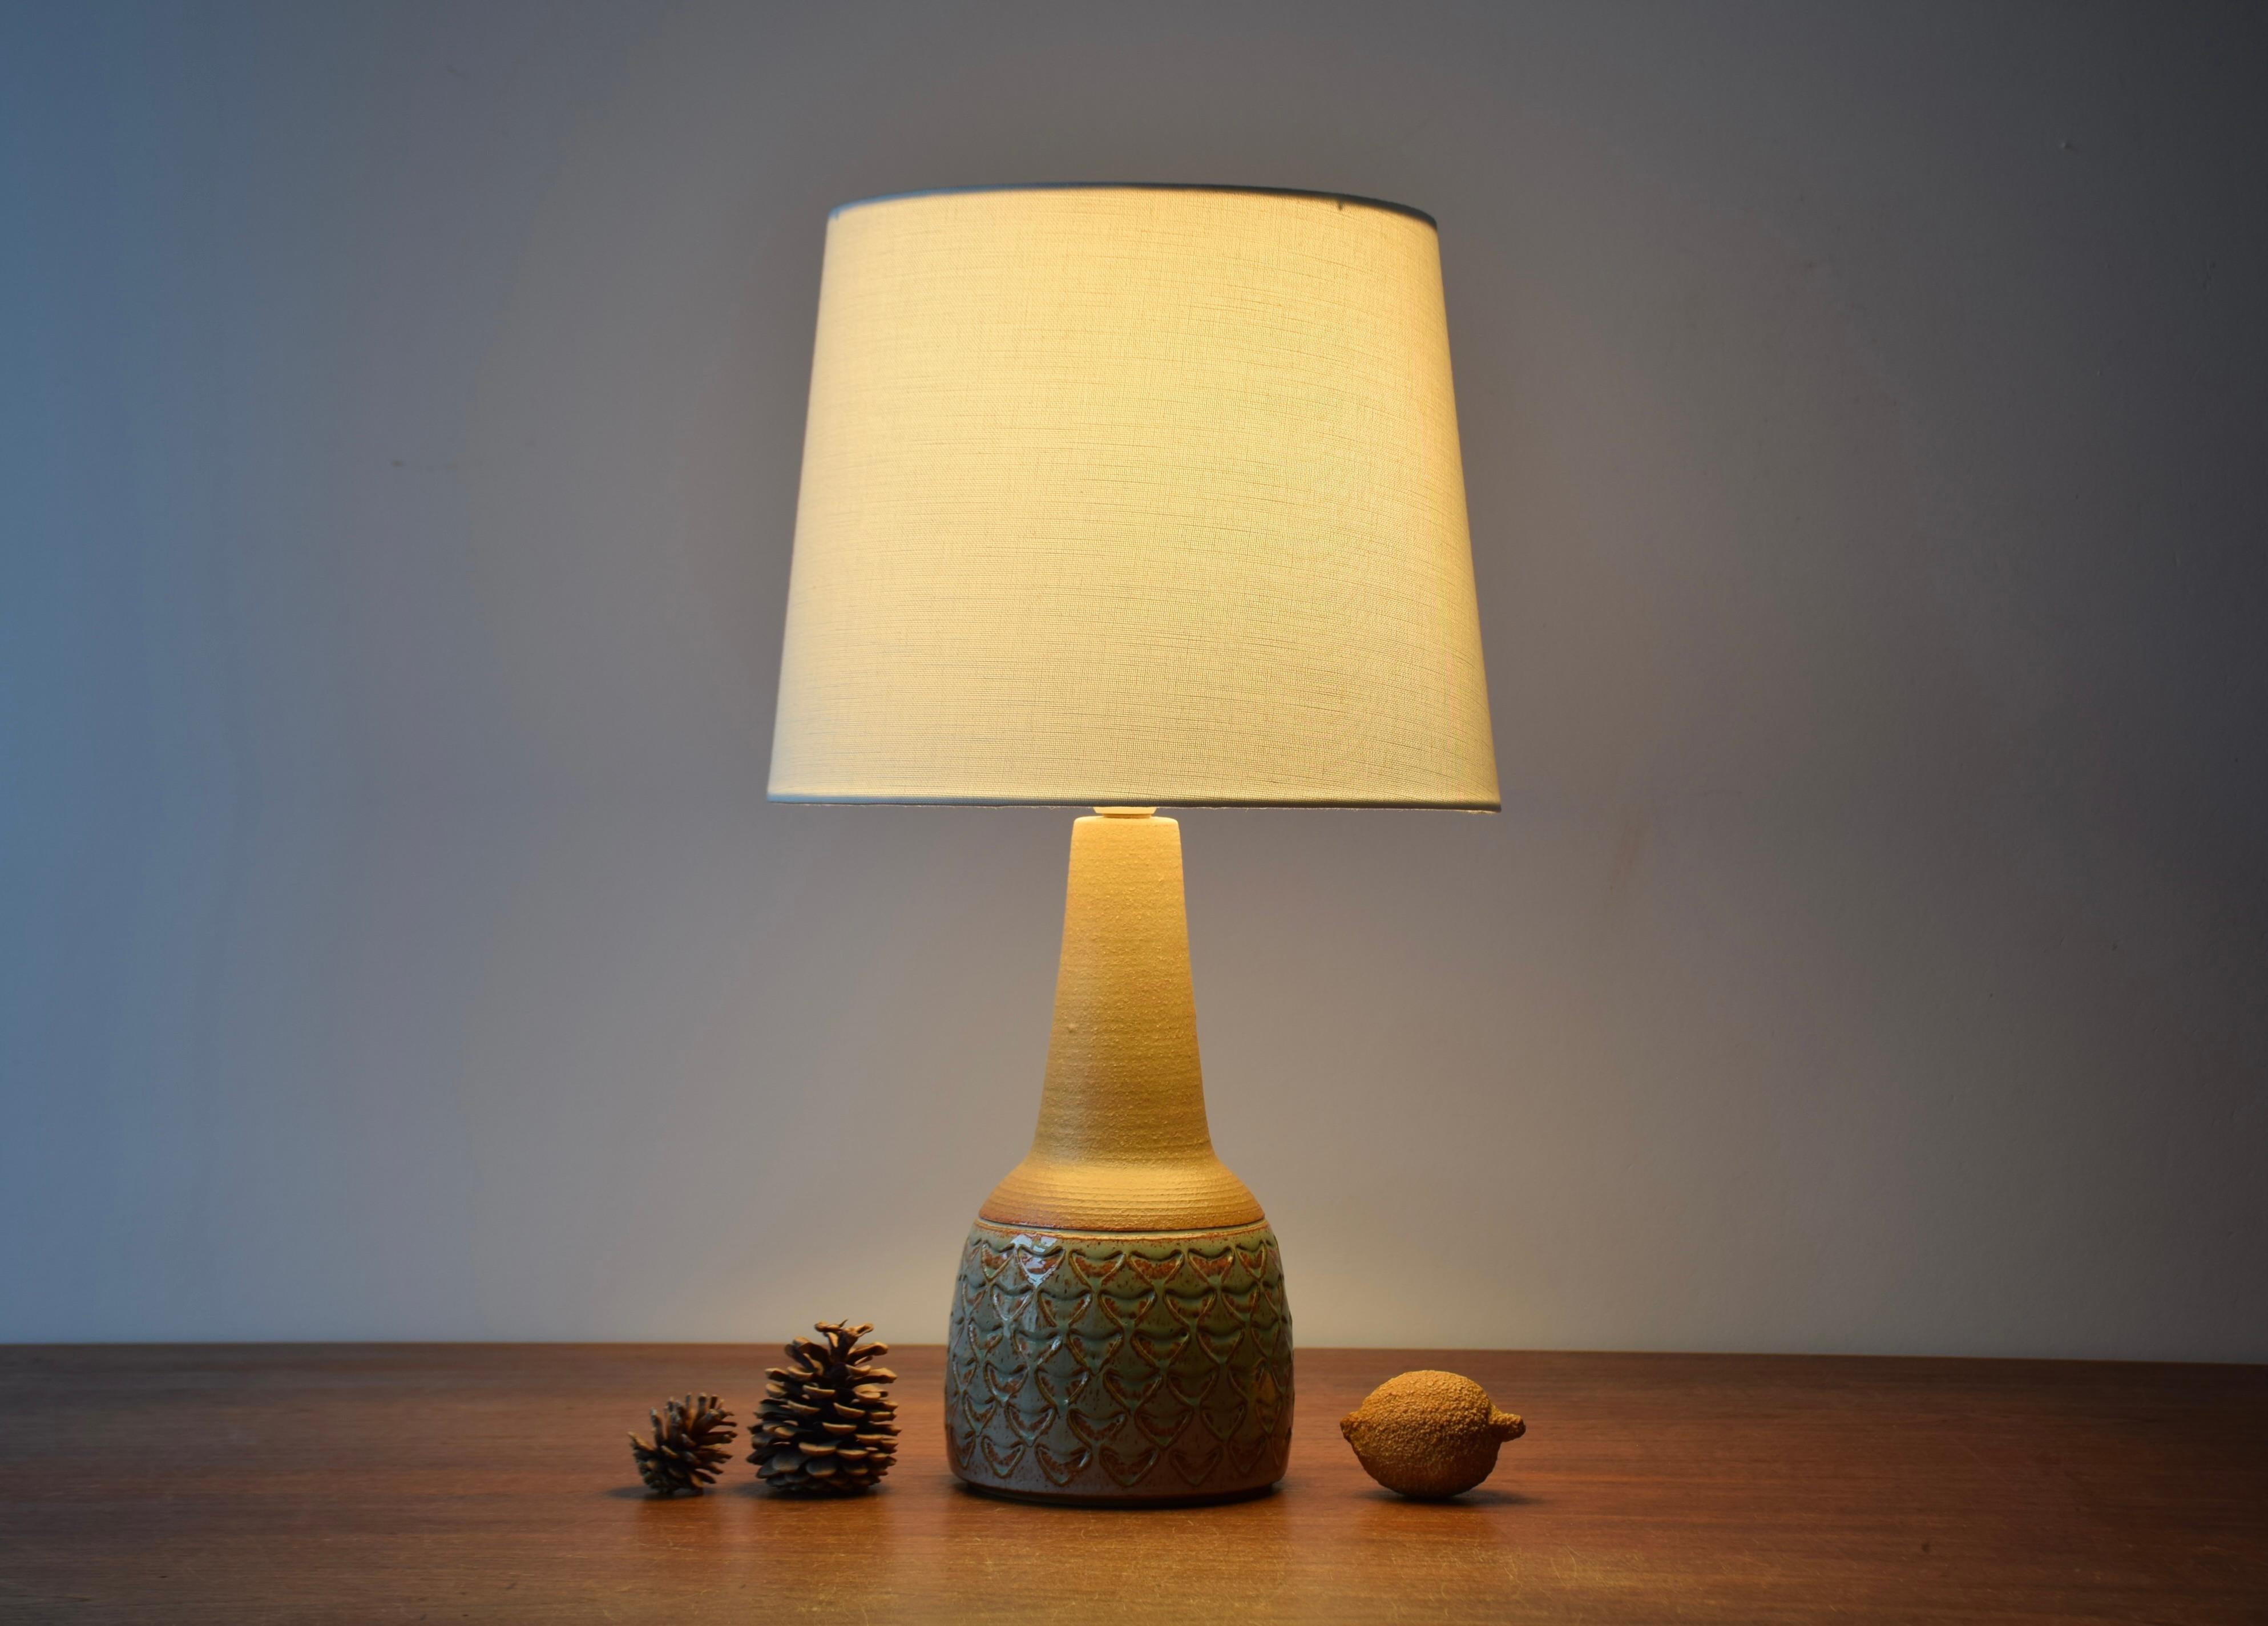 Midcentury Danish medium sized table lamp by Søholm Stentøj, Denmark. Made circa 1960s.
The lamp has repeated decor covered with a glossy pale green glaze and contrasted by an unglazed neck in warm brown. 

Included is a new lamp shade designed and